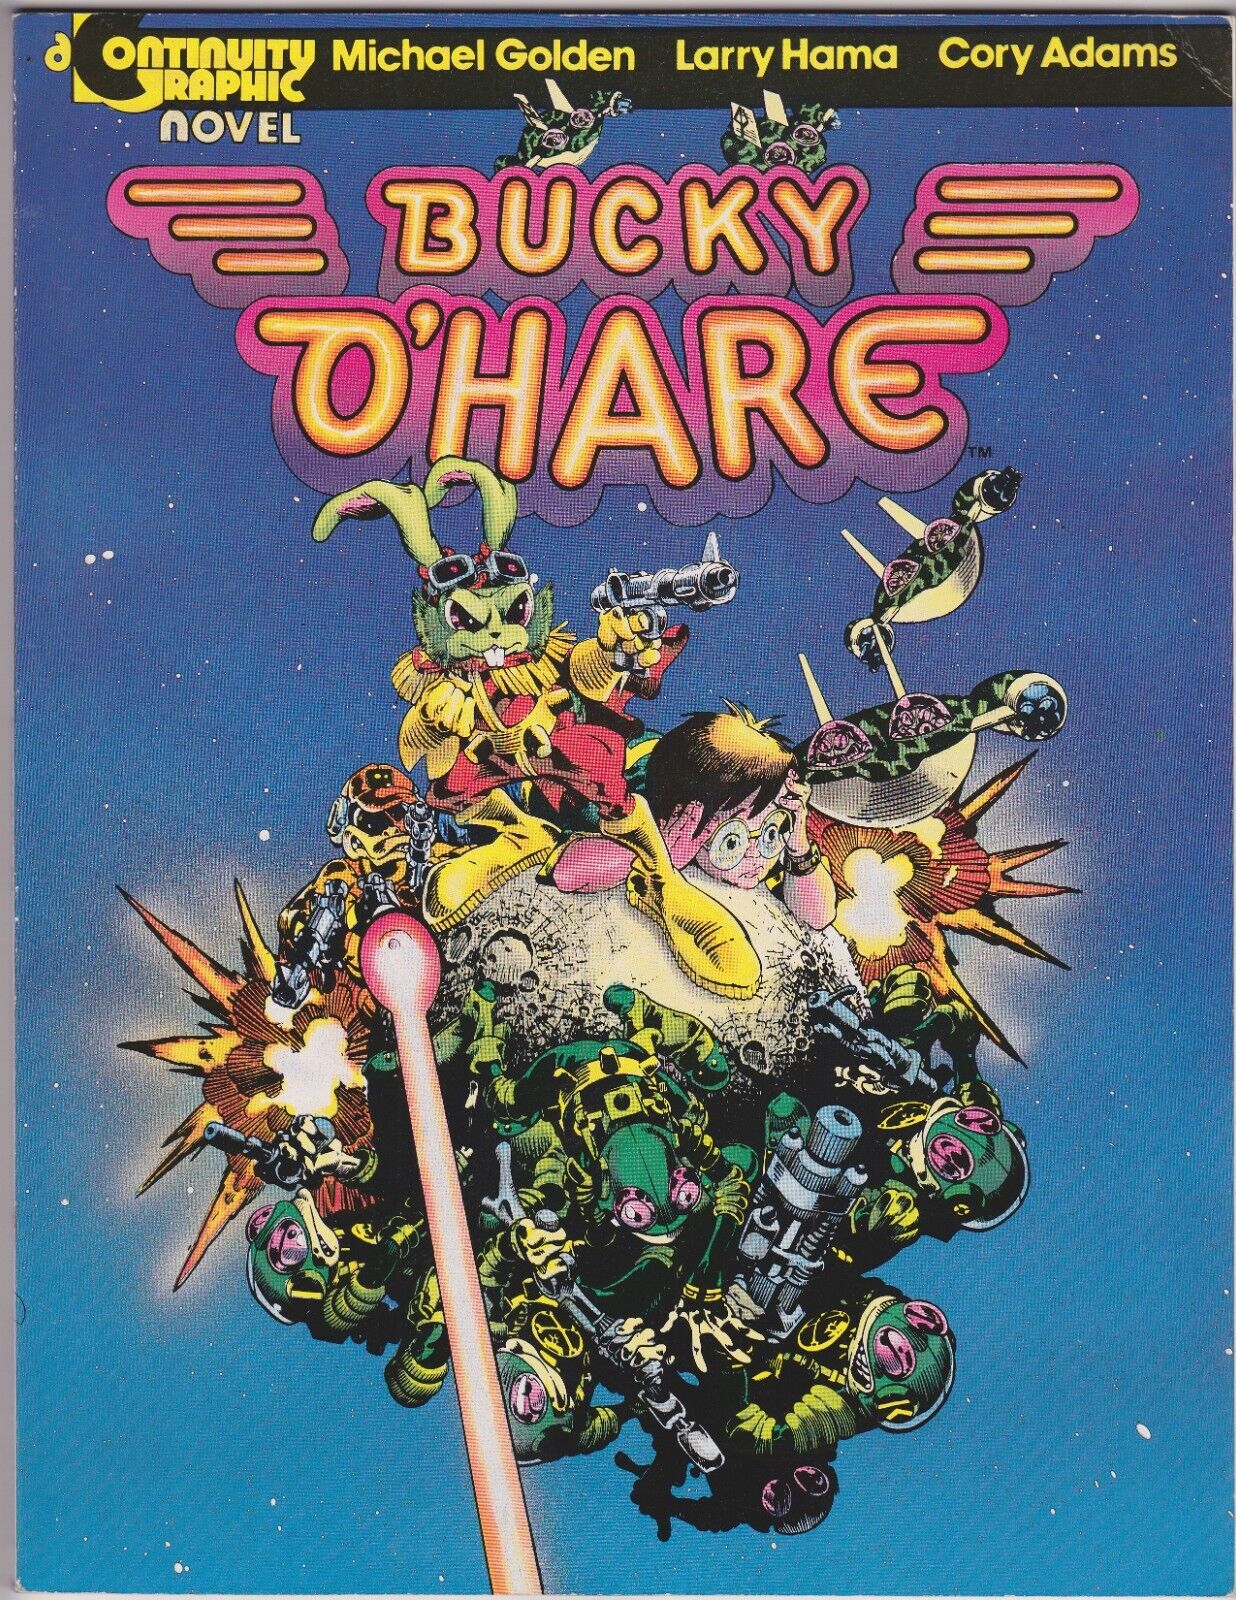 GN BUCKY O\'HARE 1986 CONTINUITY MICHAEL GOLDEN LARRY HAMA CLASSIC GRAPHIC NOVEL